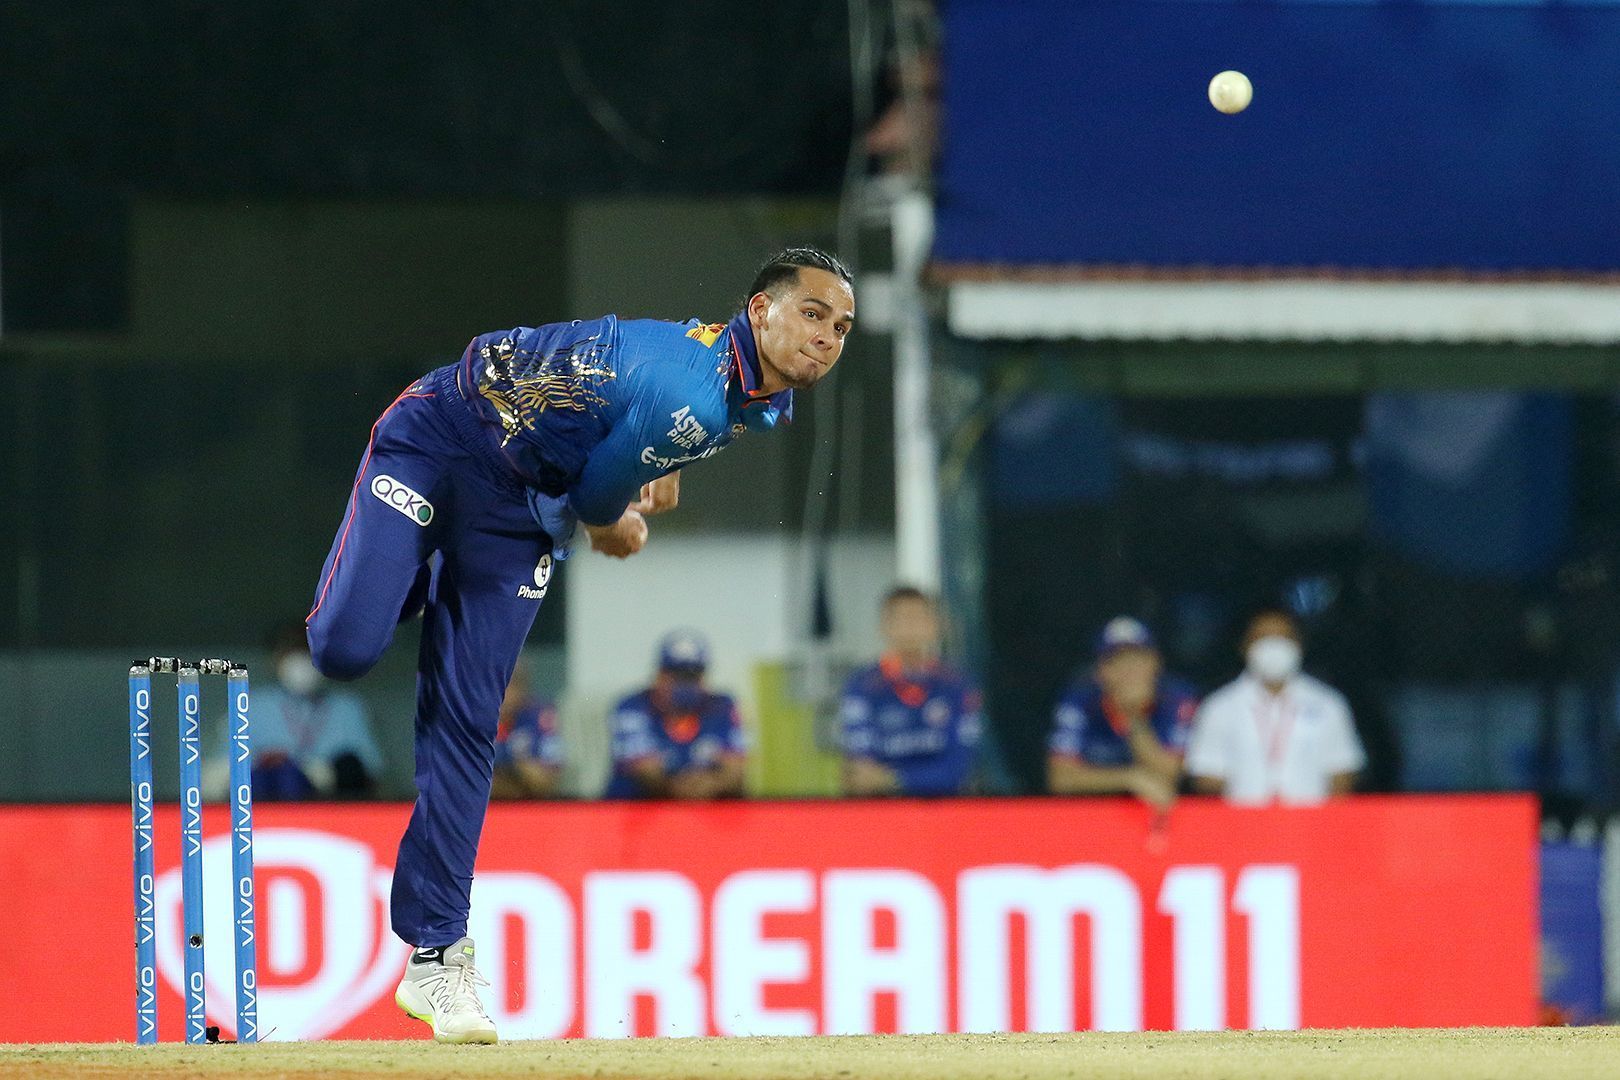 Rahul Chahar is one of the more promising young wrist-spinners in the country, and could well be picked up by RR in the IPL 2022 Auction (Picture Credits: Faheem Hussain/Sportzpics for IPL).